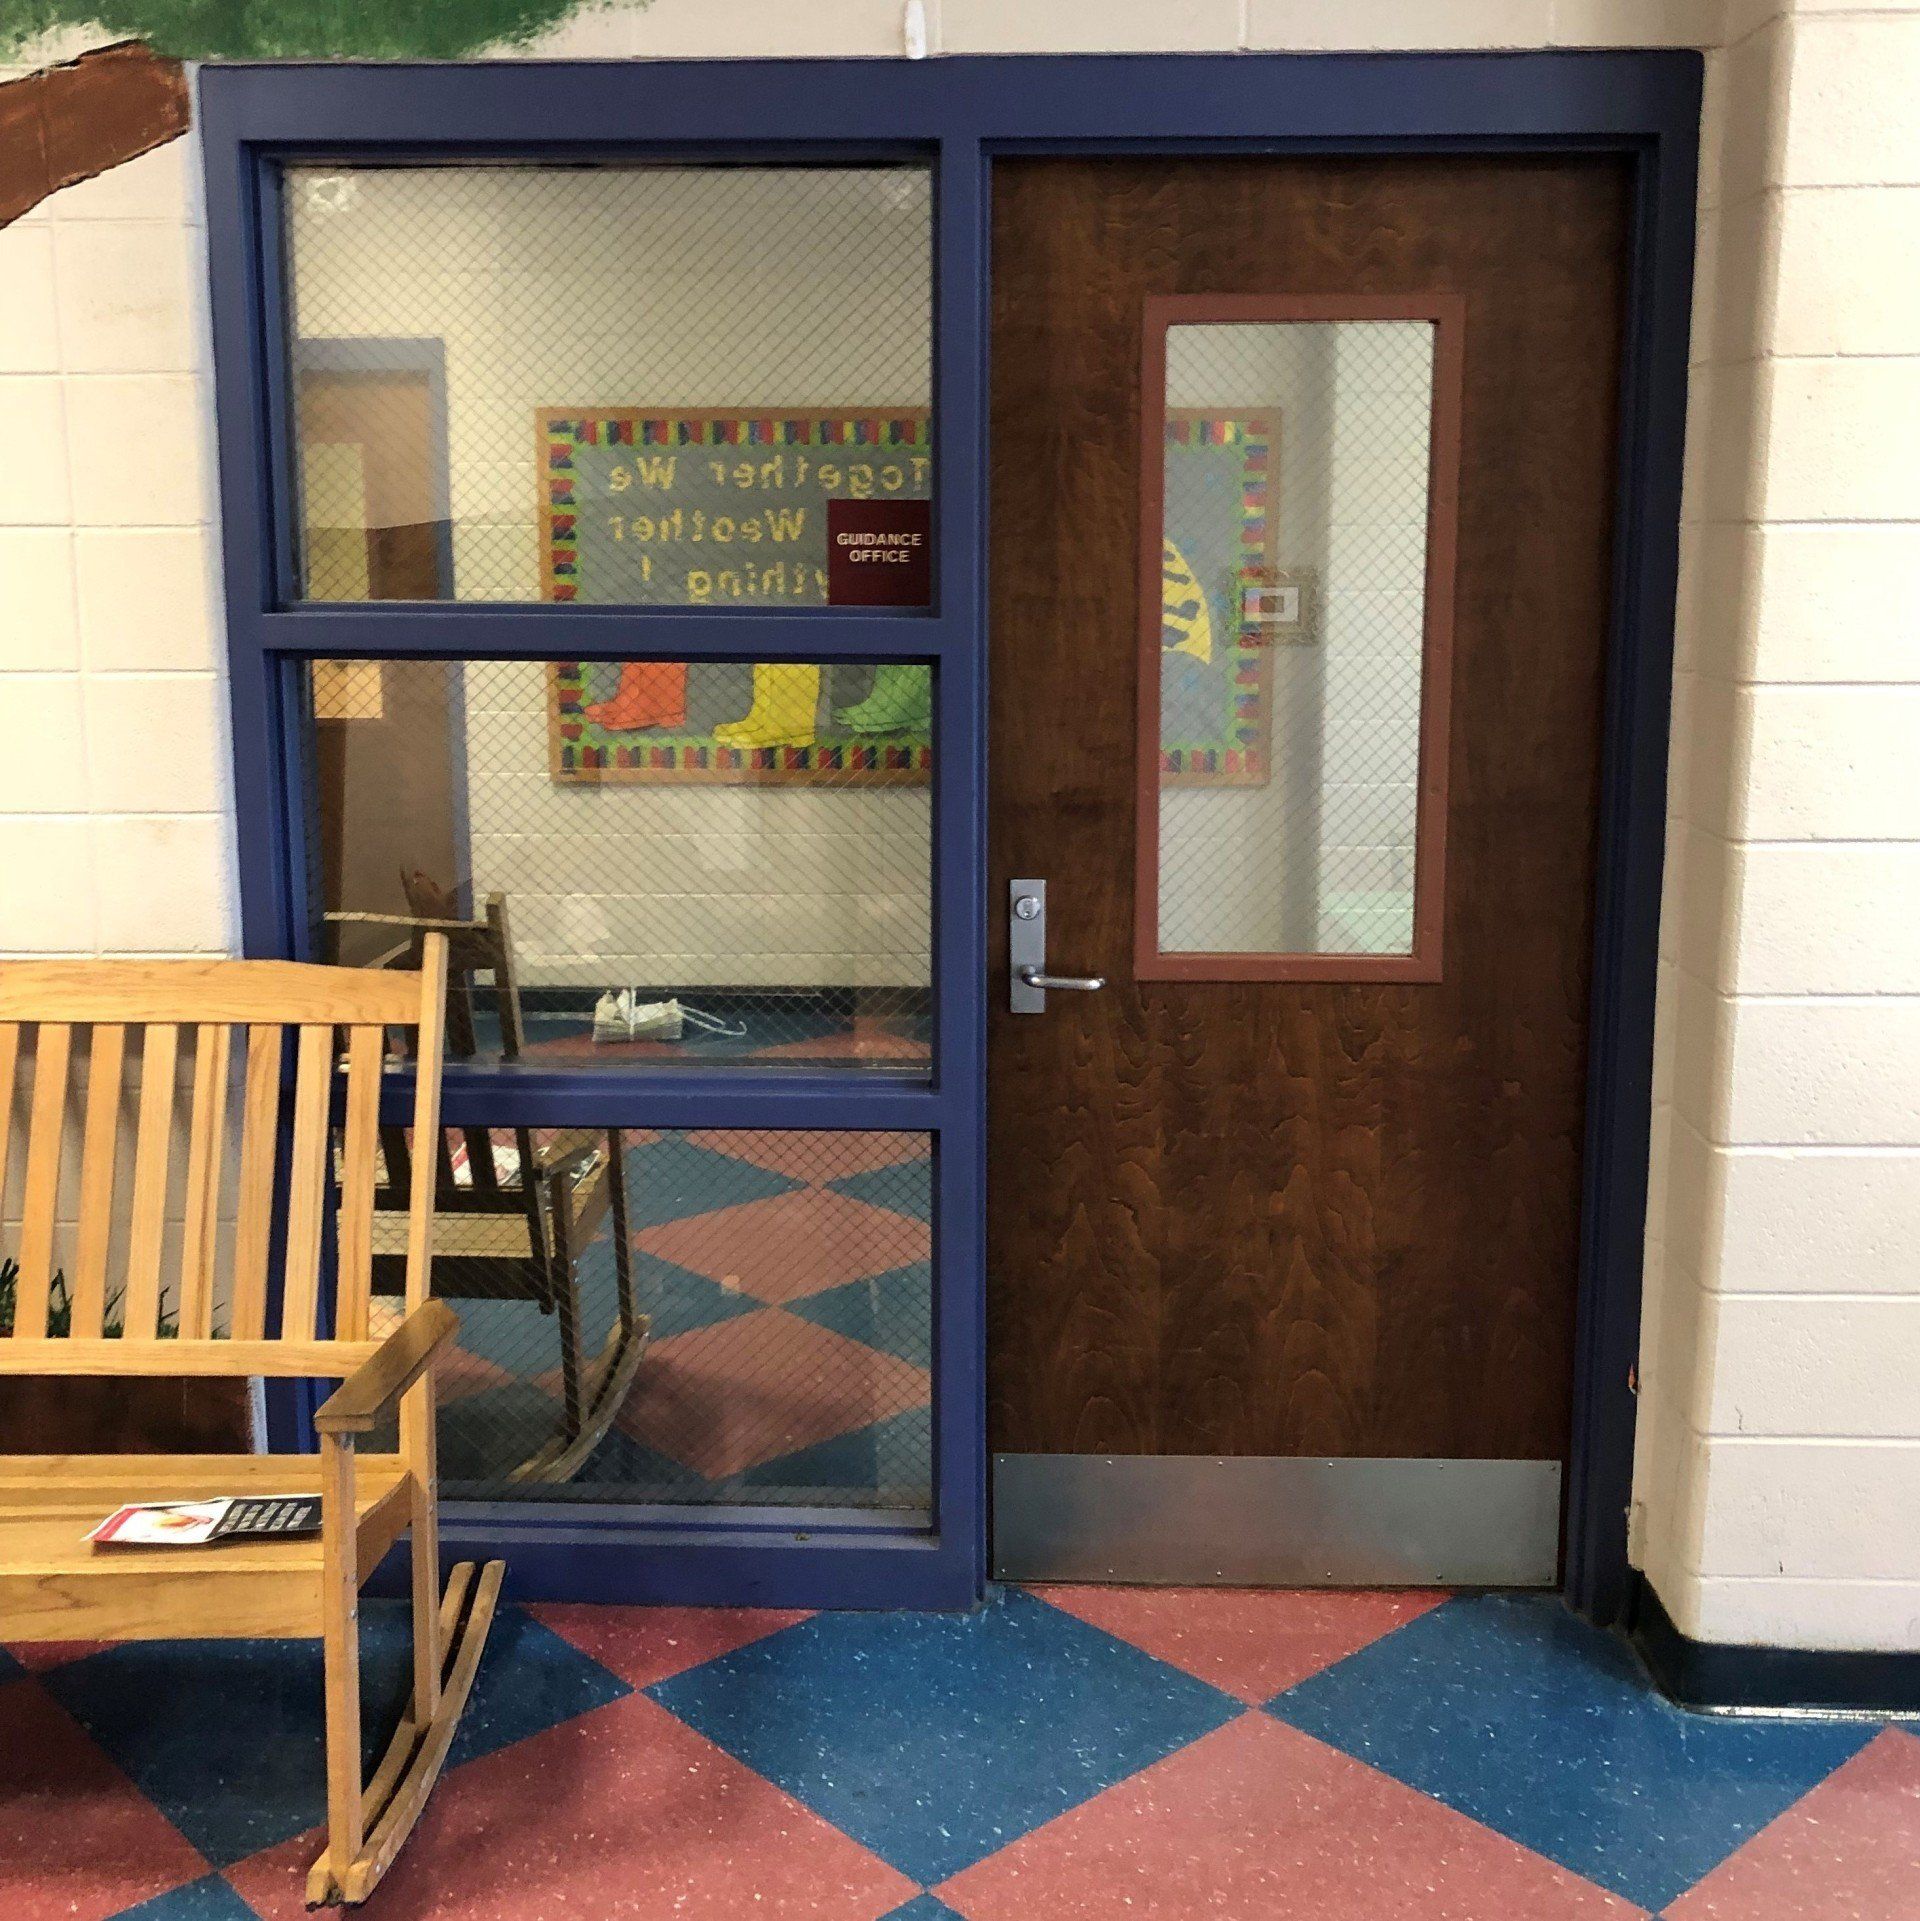 Professional office tinting - Privacy was gained inside the office of this Elementary school in April 2019.